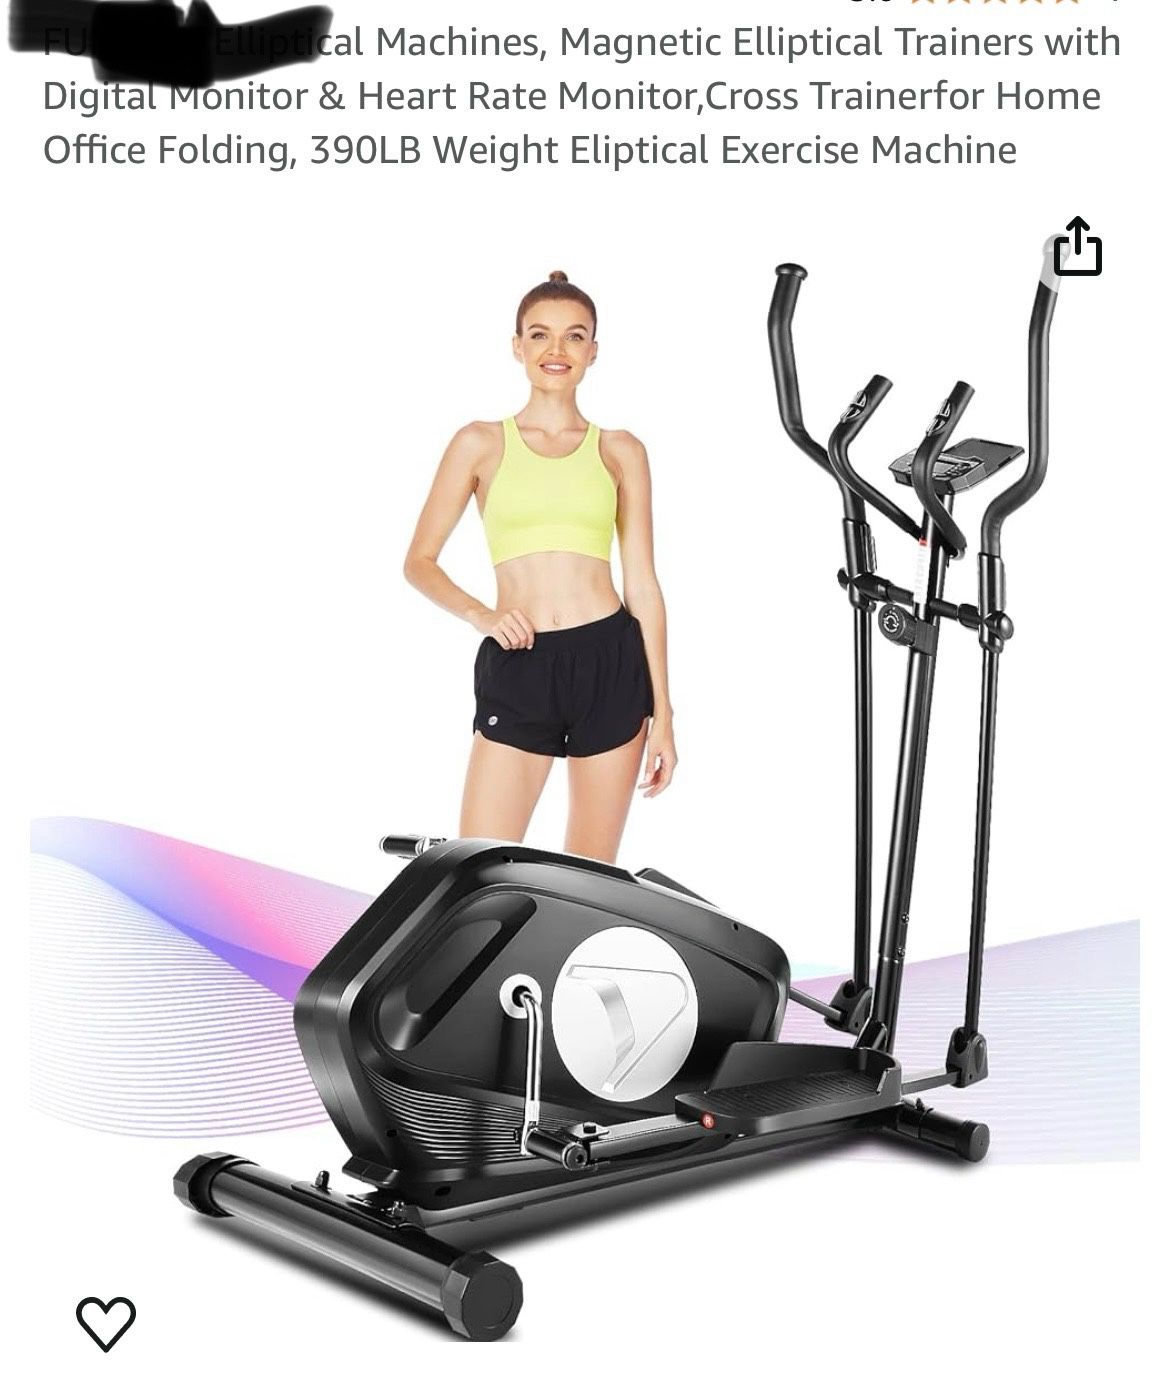 Magnetic Elliptical Trainers with Digital Monitor & Heart Rate Monitor,Cross Trainerfor Home Office Folding, 390LB Weight Eliptical Exercise Machine